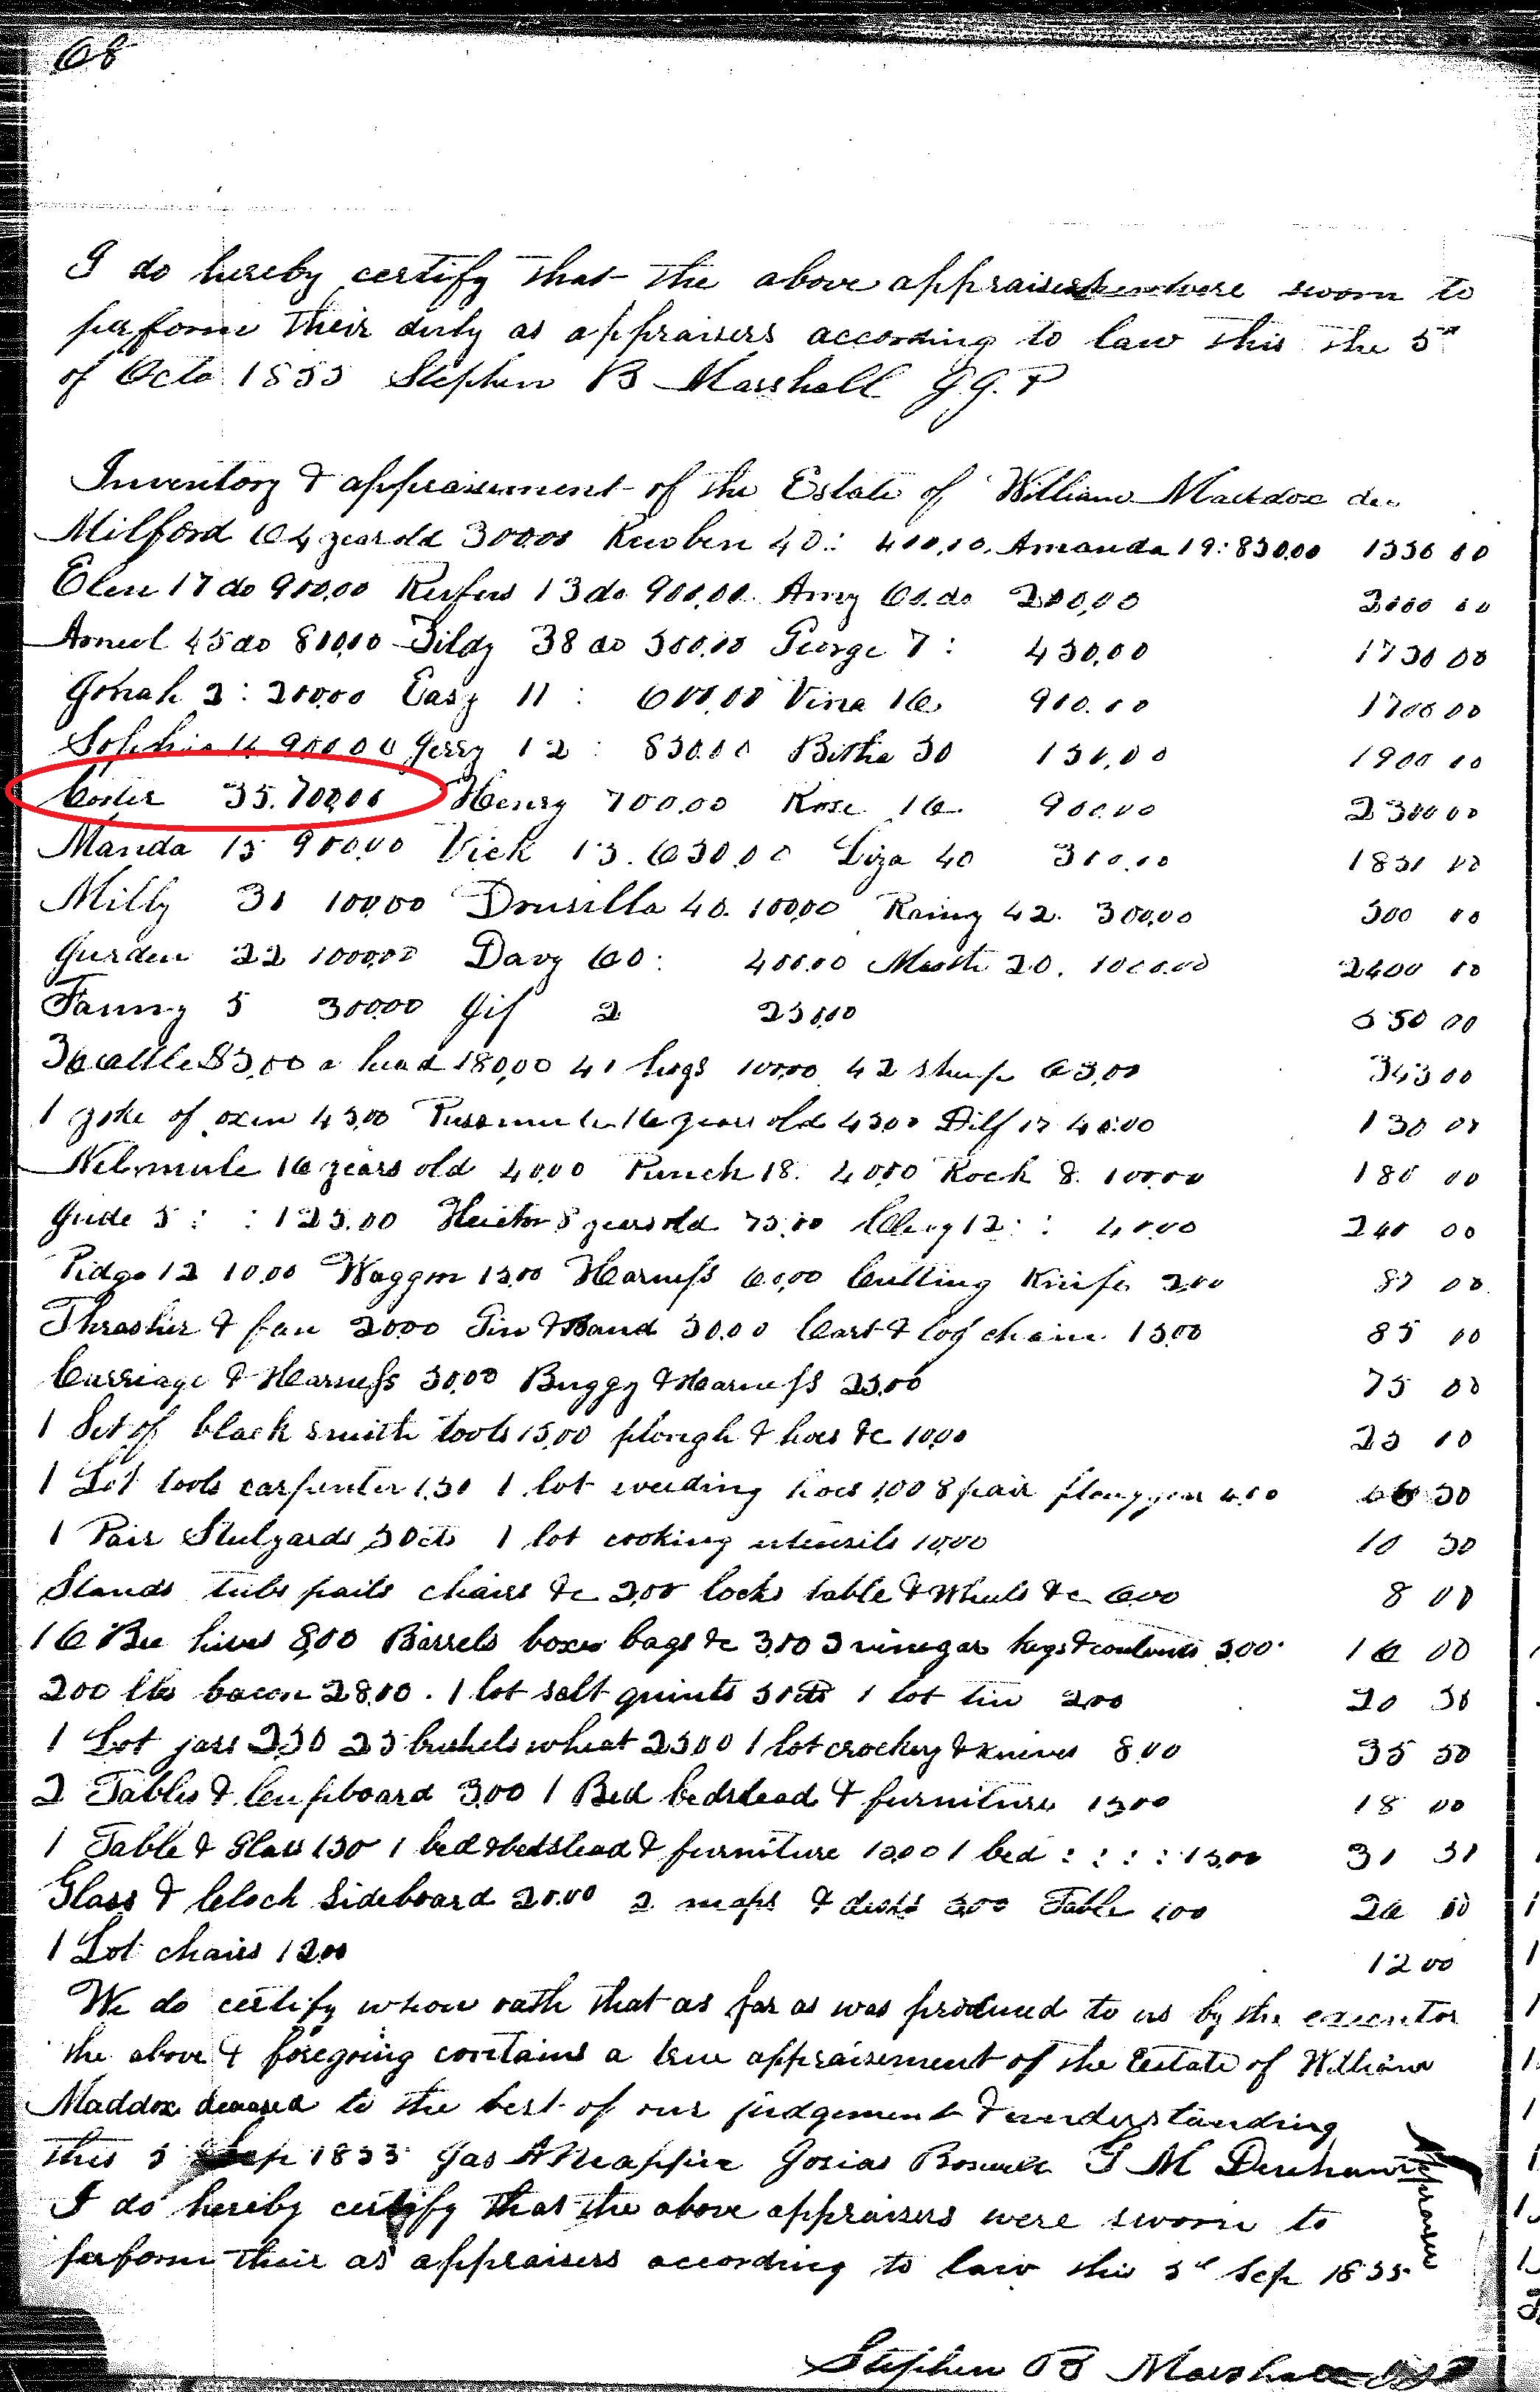 Carter Maddox - 10.05.1855 -Putnam Invent Bk AA, pp 68, 69_Page_1